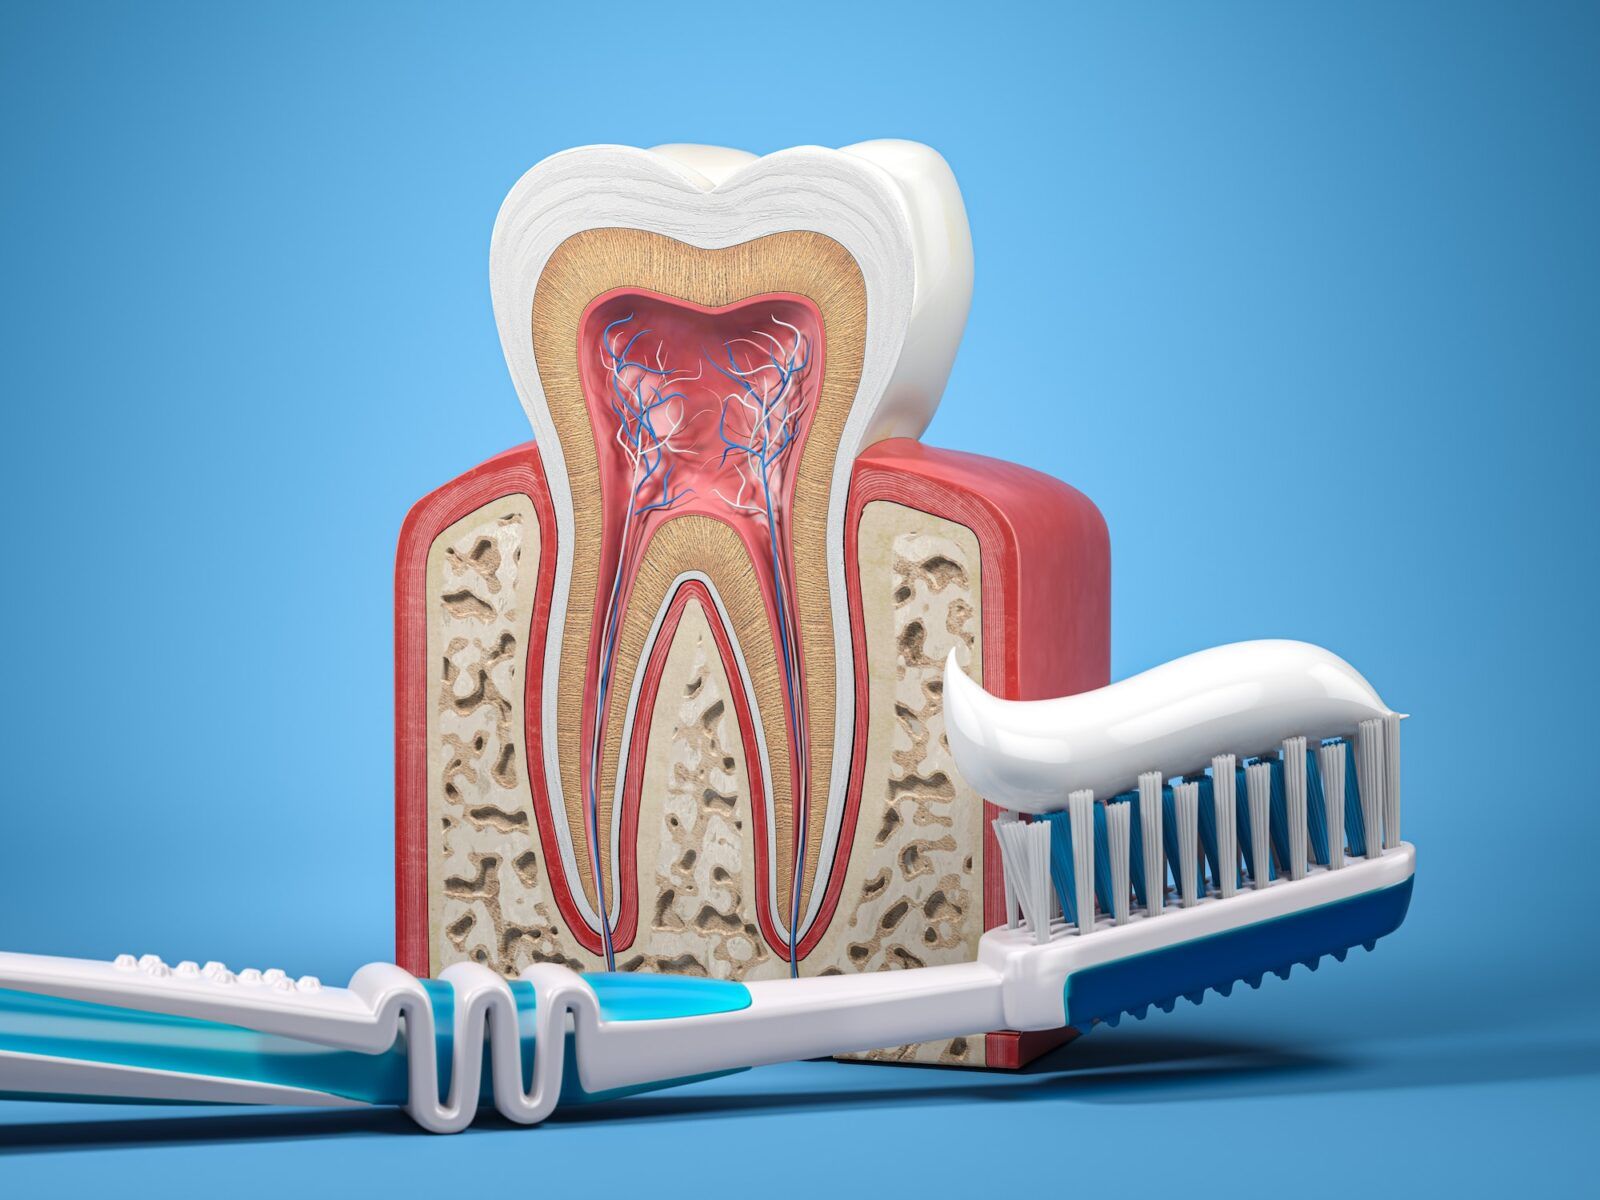 Tooth brush with toothpaste and cross section of human tooth. Dental health and protection concept.